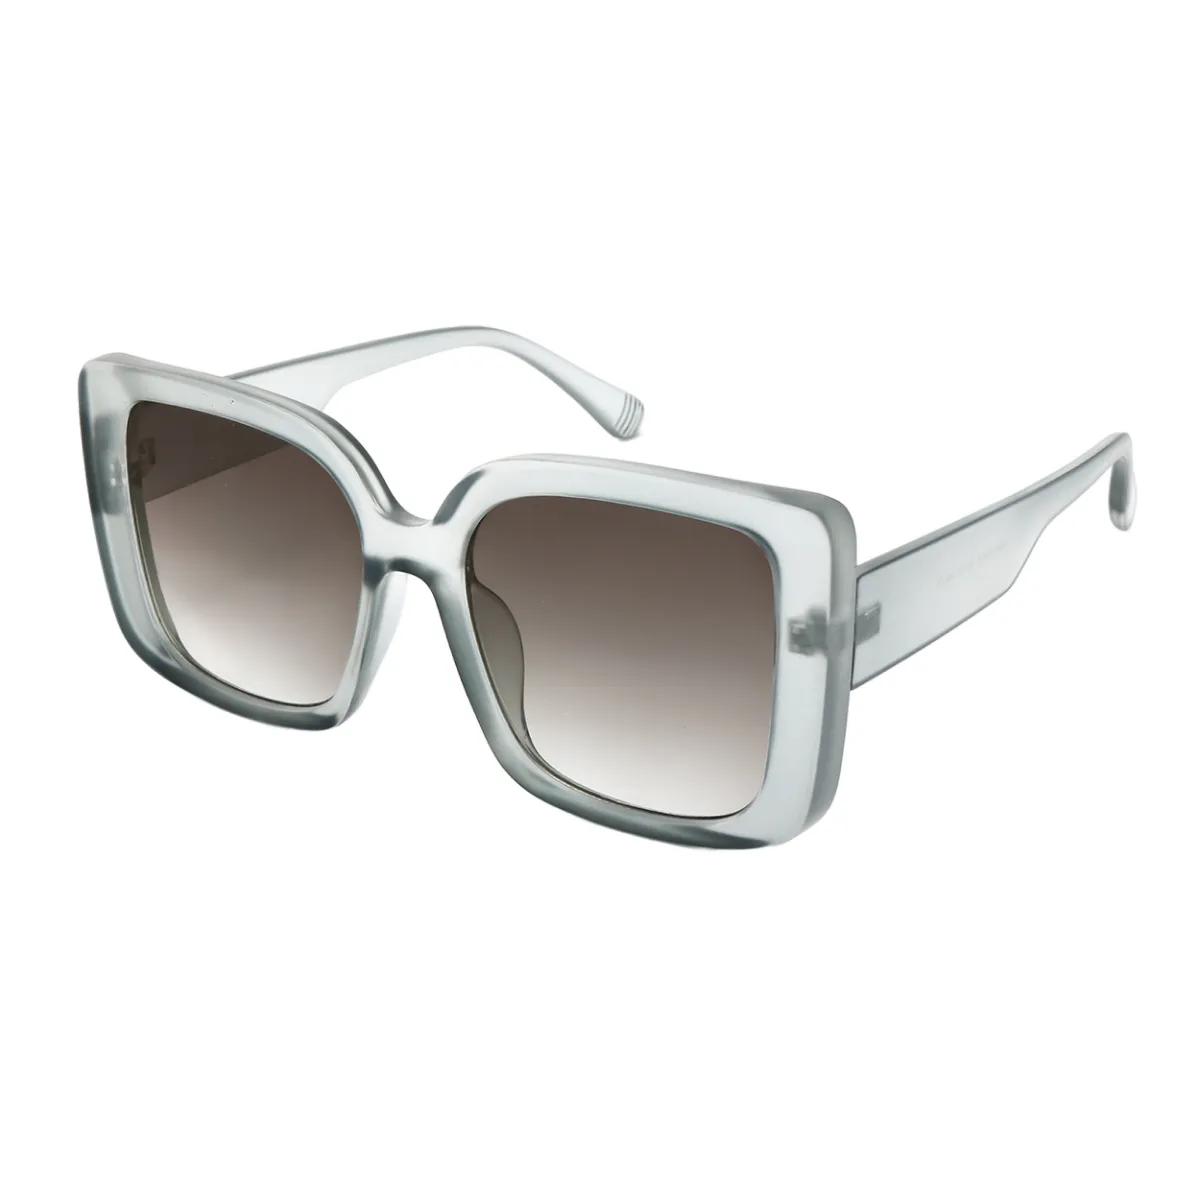 Aspasia - Square Frosted Grey Transparent Sunglasses for Women